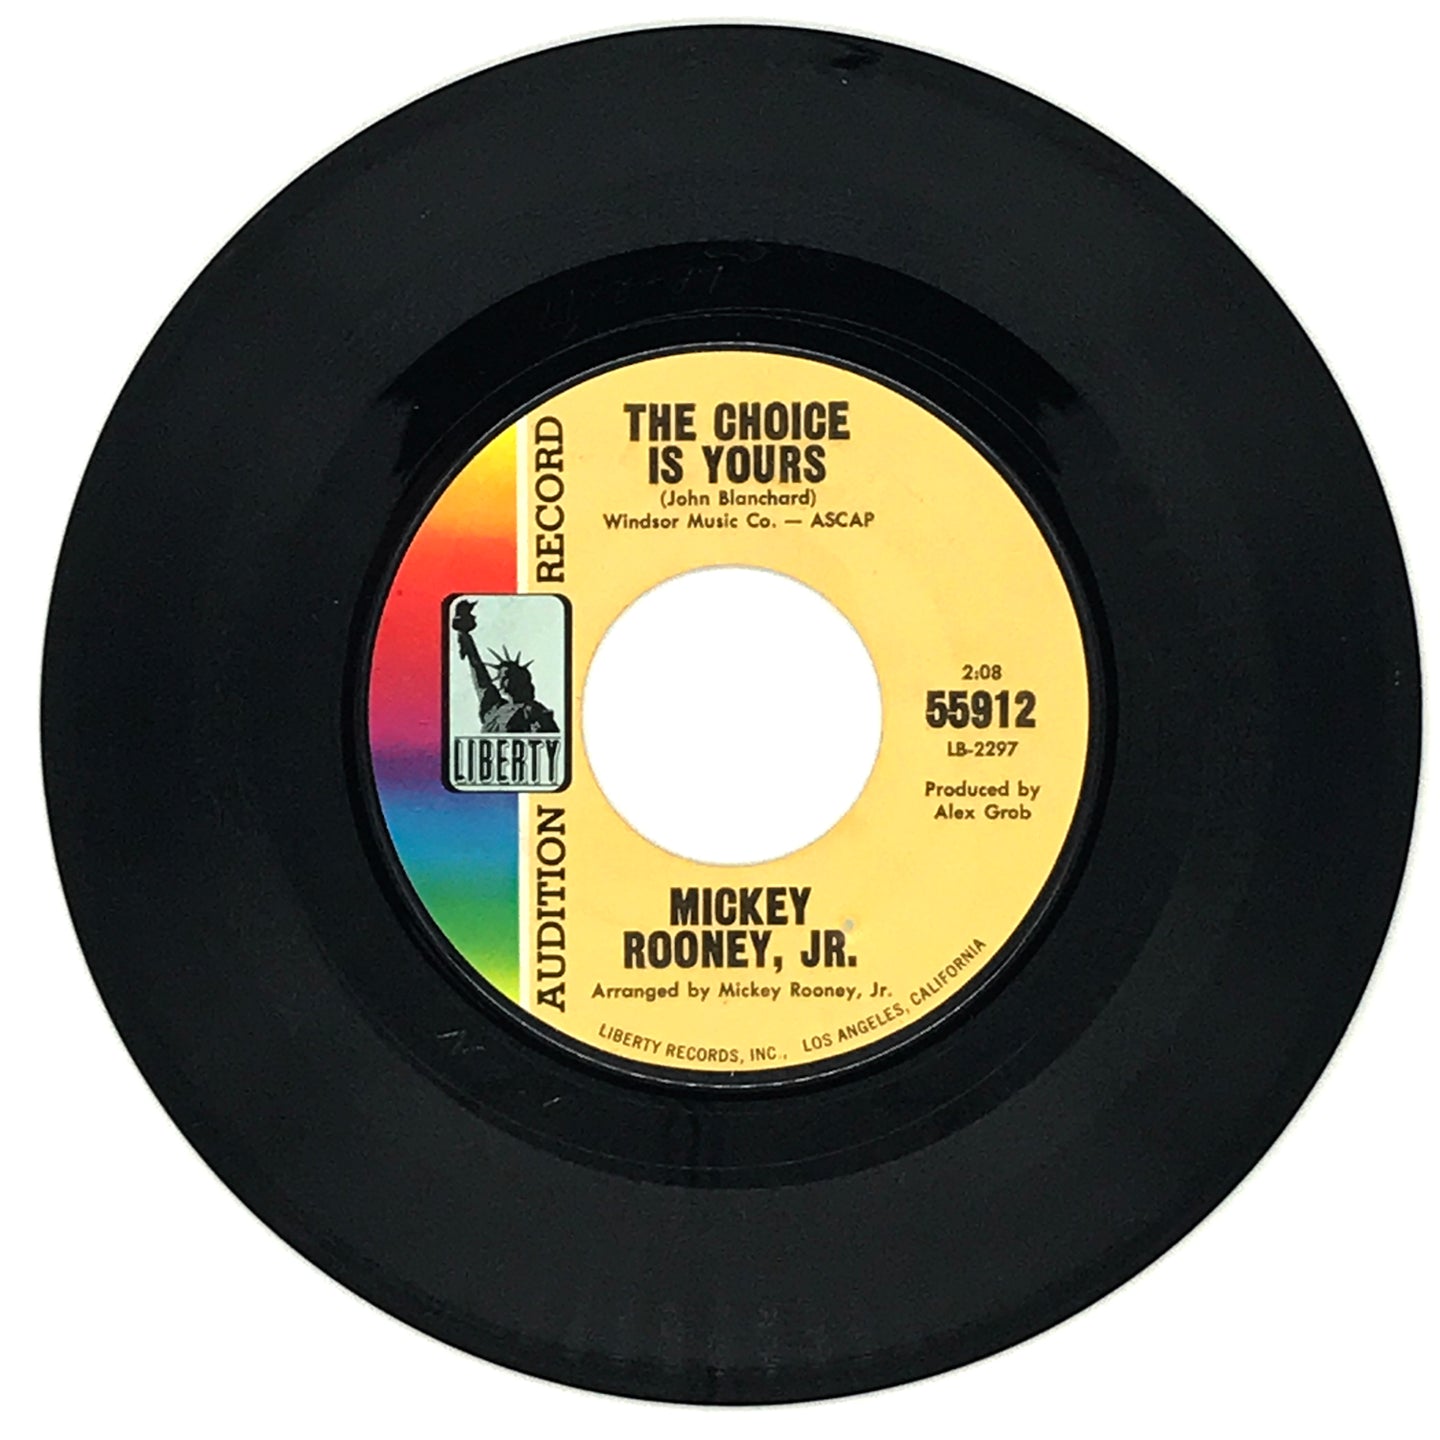 Mickey Rooney, Jr. : THE CHOICE IS YOURS/ I'LL BE THERE